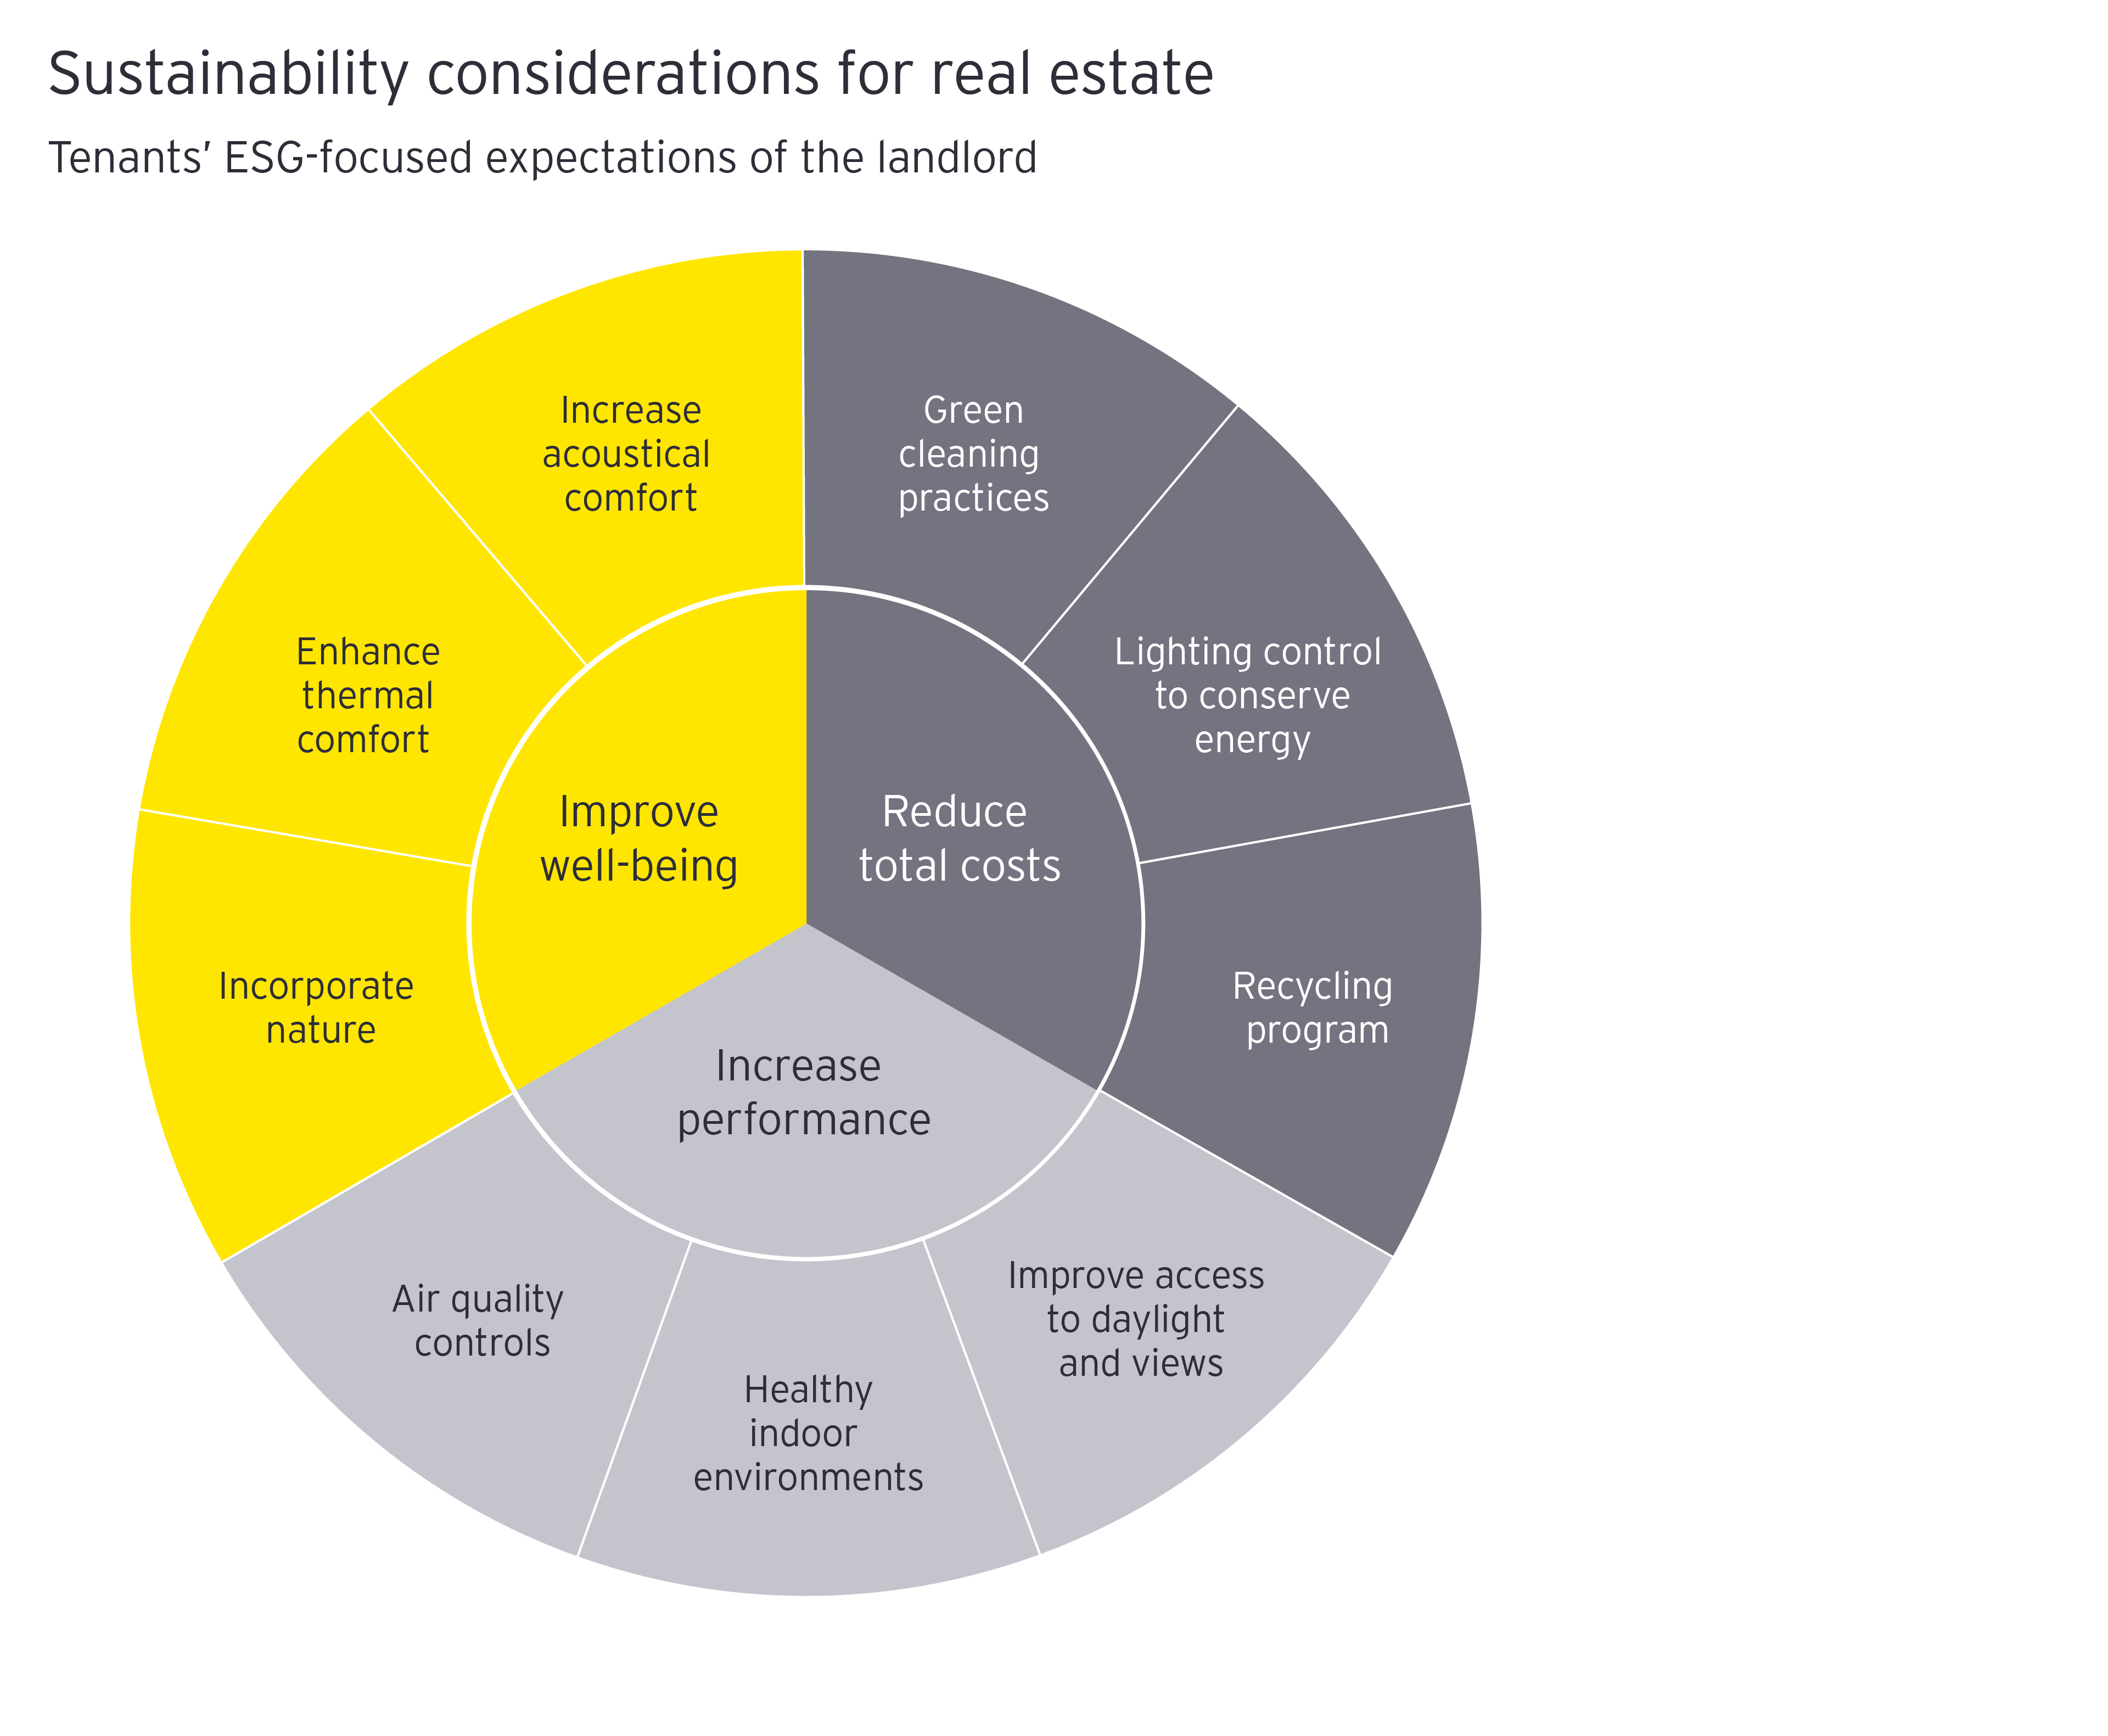 EY - Sustainability considerations for real estate